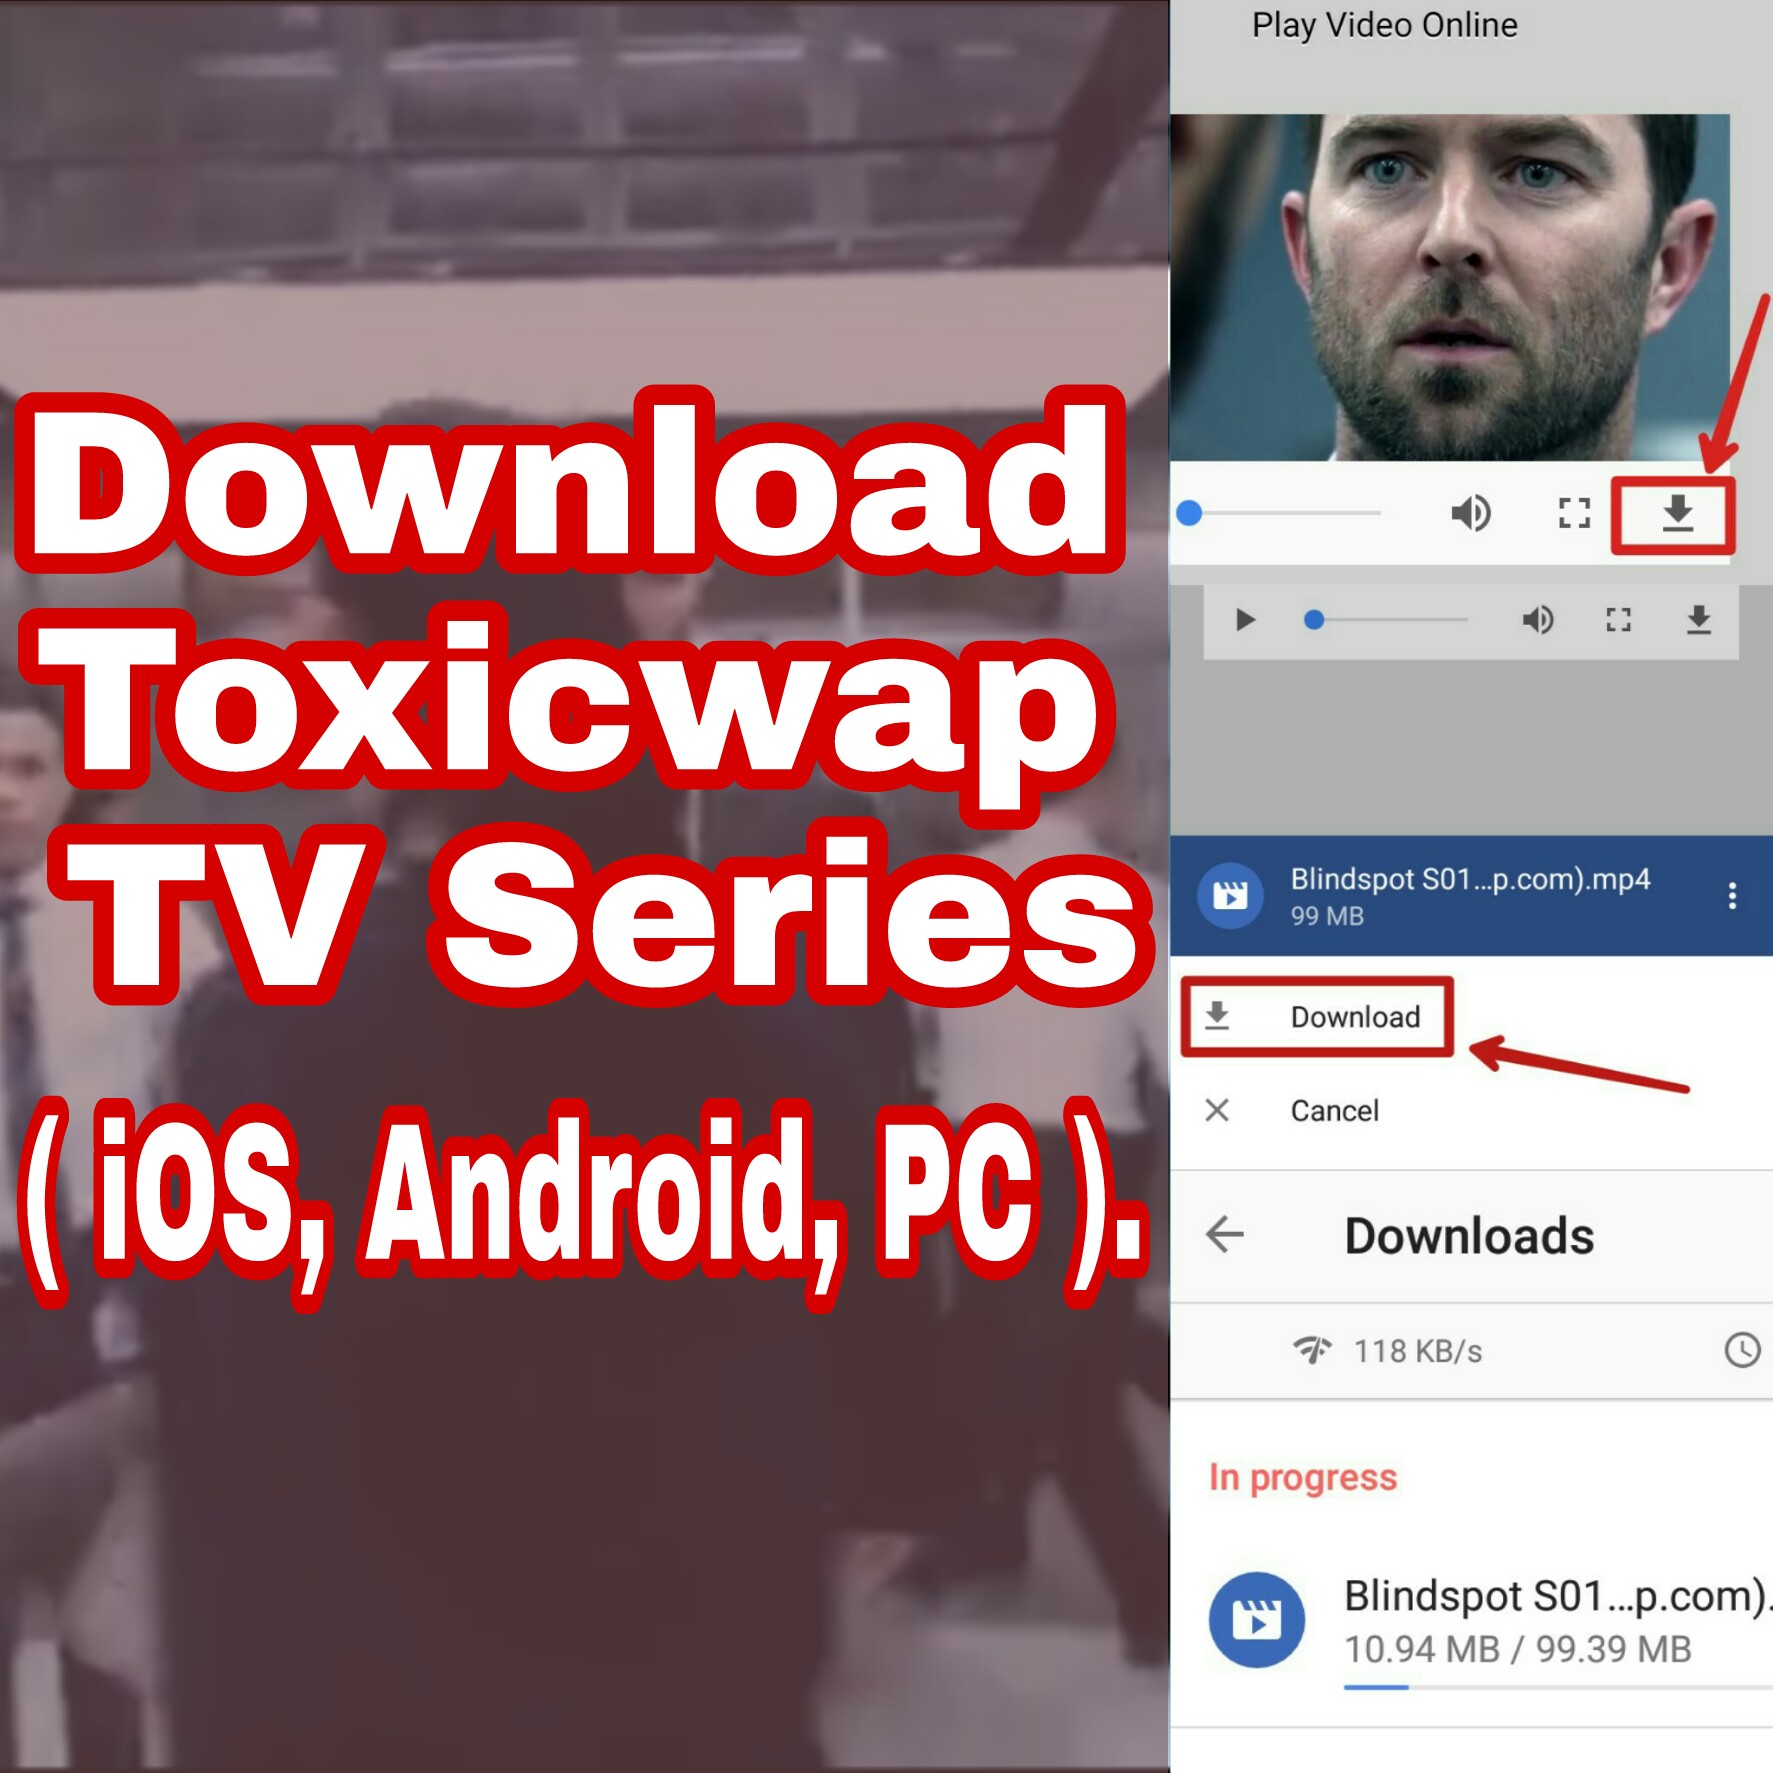 Download Toxicwap TV Series